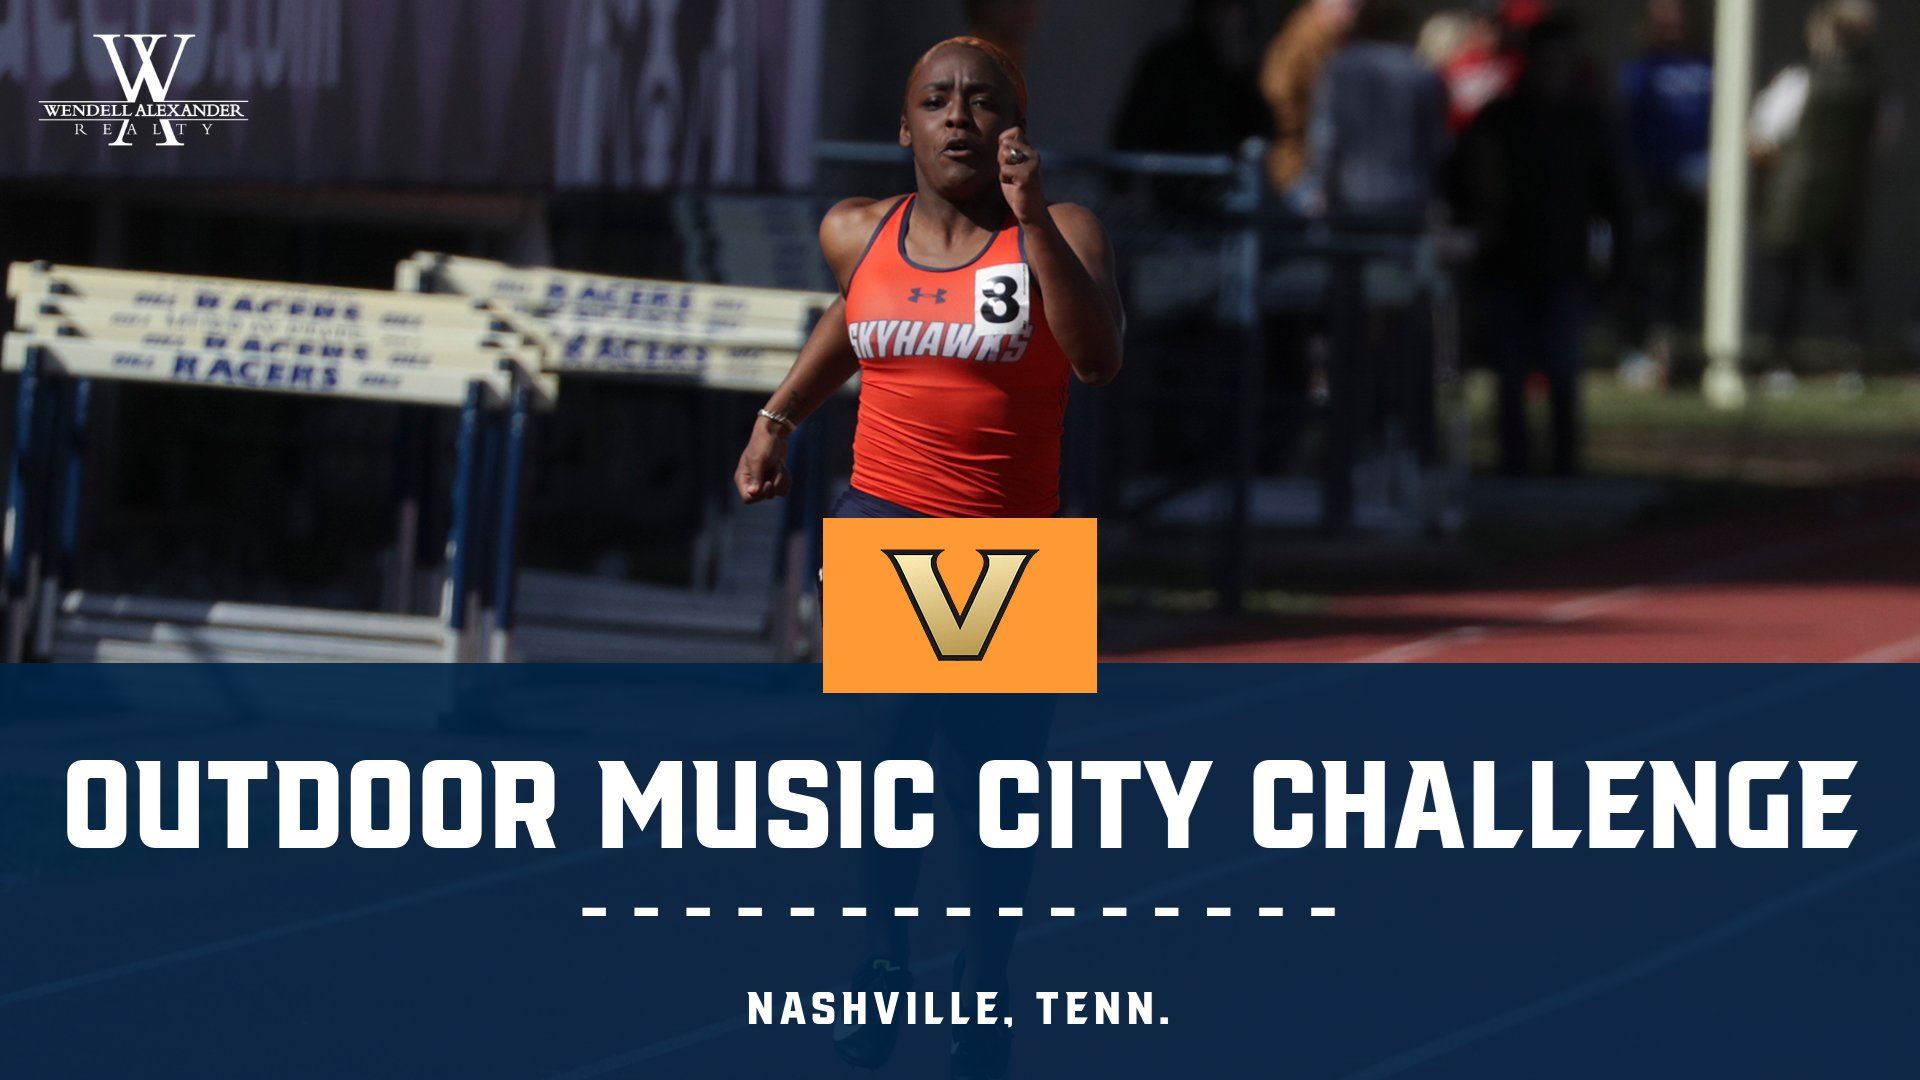 UT Martin Track Finishes Regular Season With Big Day at Outdoor Music